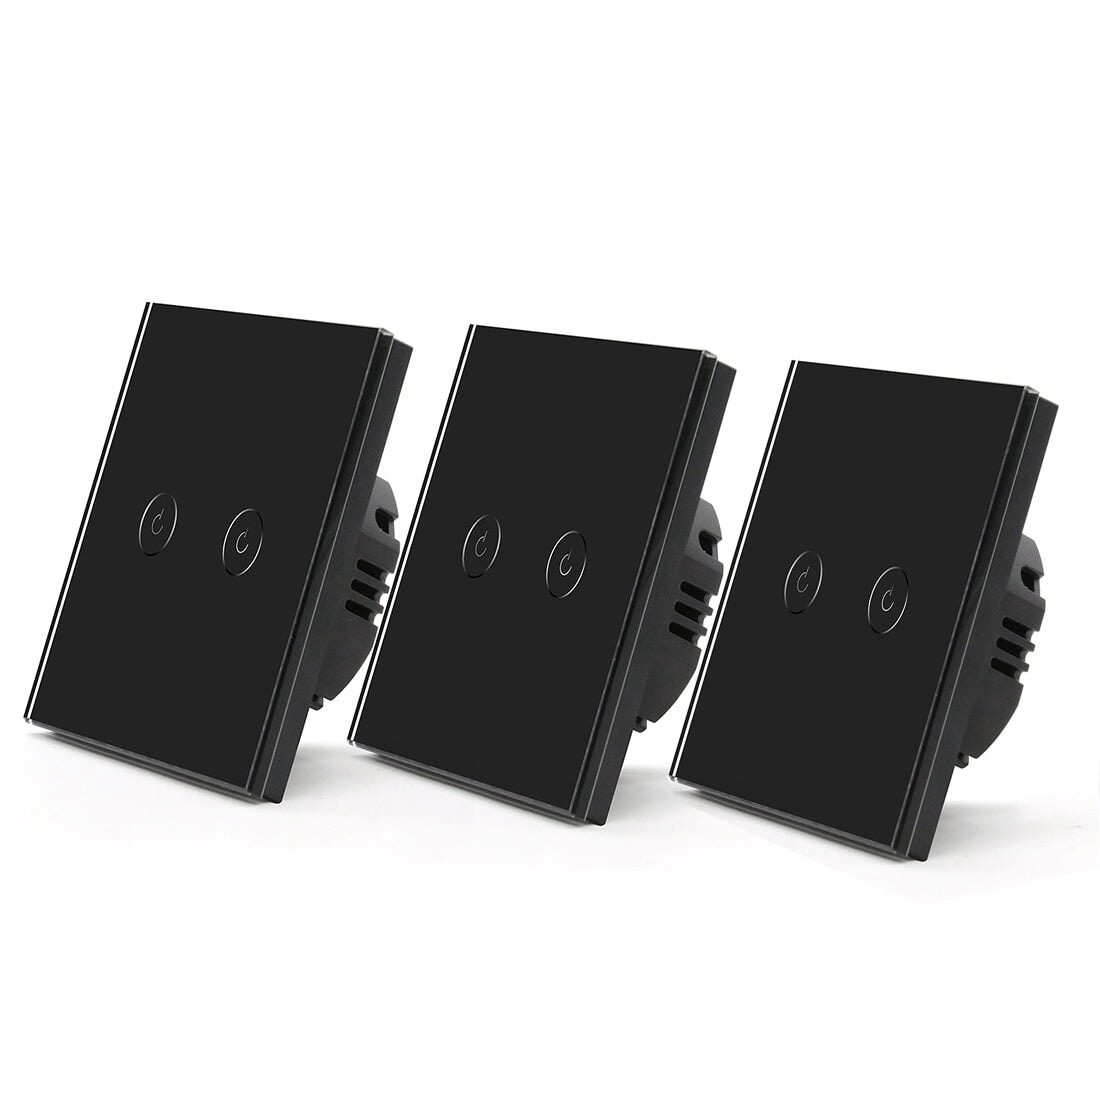 Bseed Smart Wifi Touch Switch 2 Gang 1/2/3 Way 1/2/3 Pcs/Pack Wall Plates & Covers Bseedswitch Black 3Pcs/Pack 